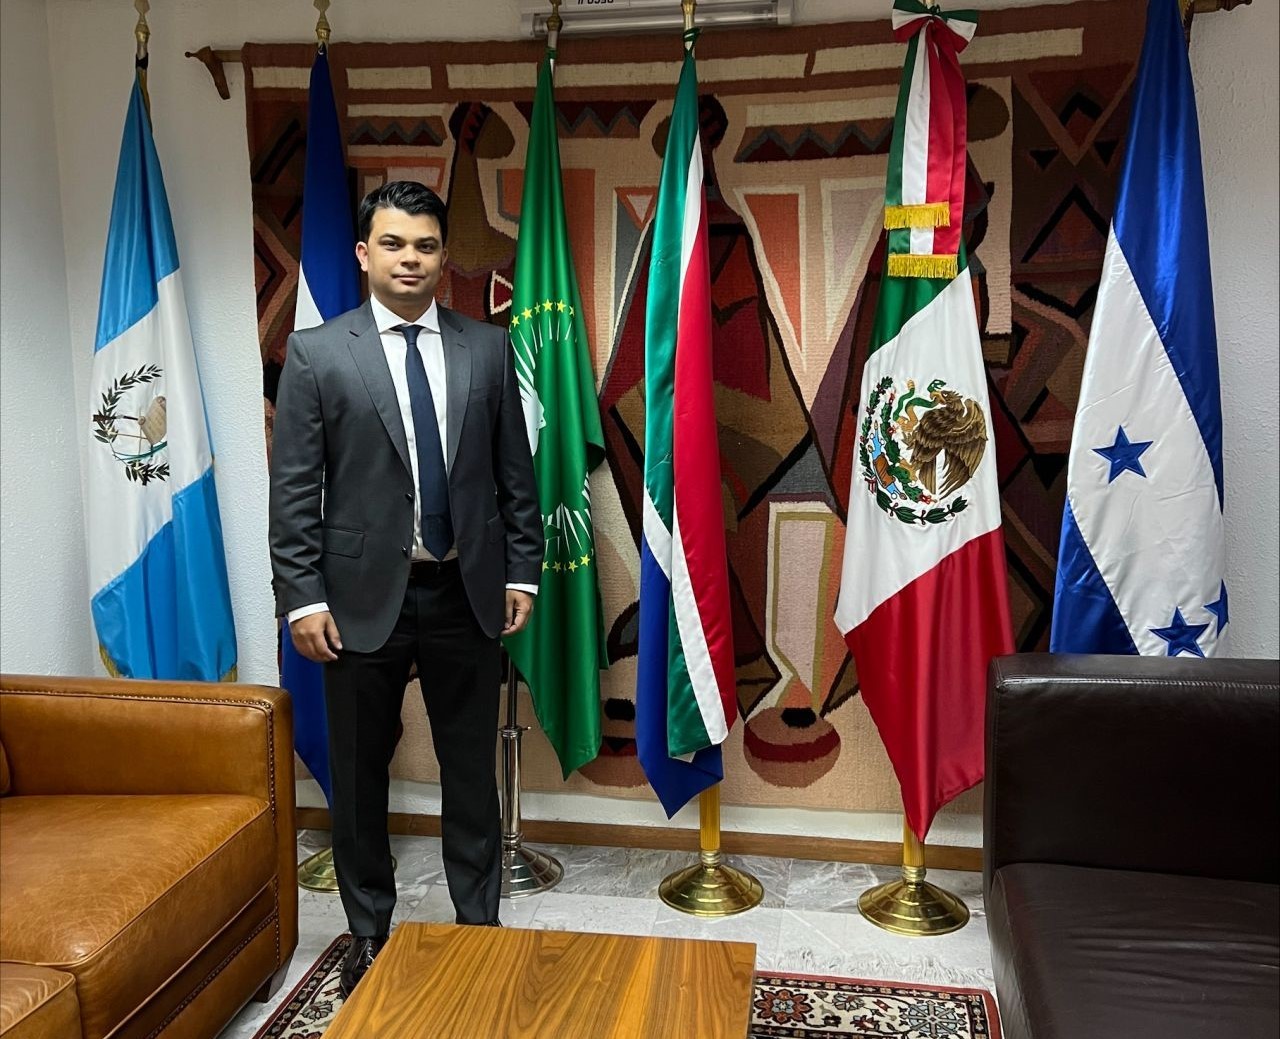 Our CEO, Biplab Chaudhuri, in Mexico City meeting with the Ambassador of South Africa to Mexico